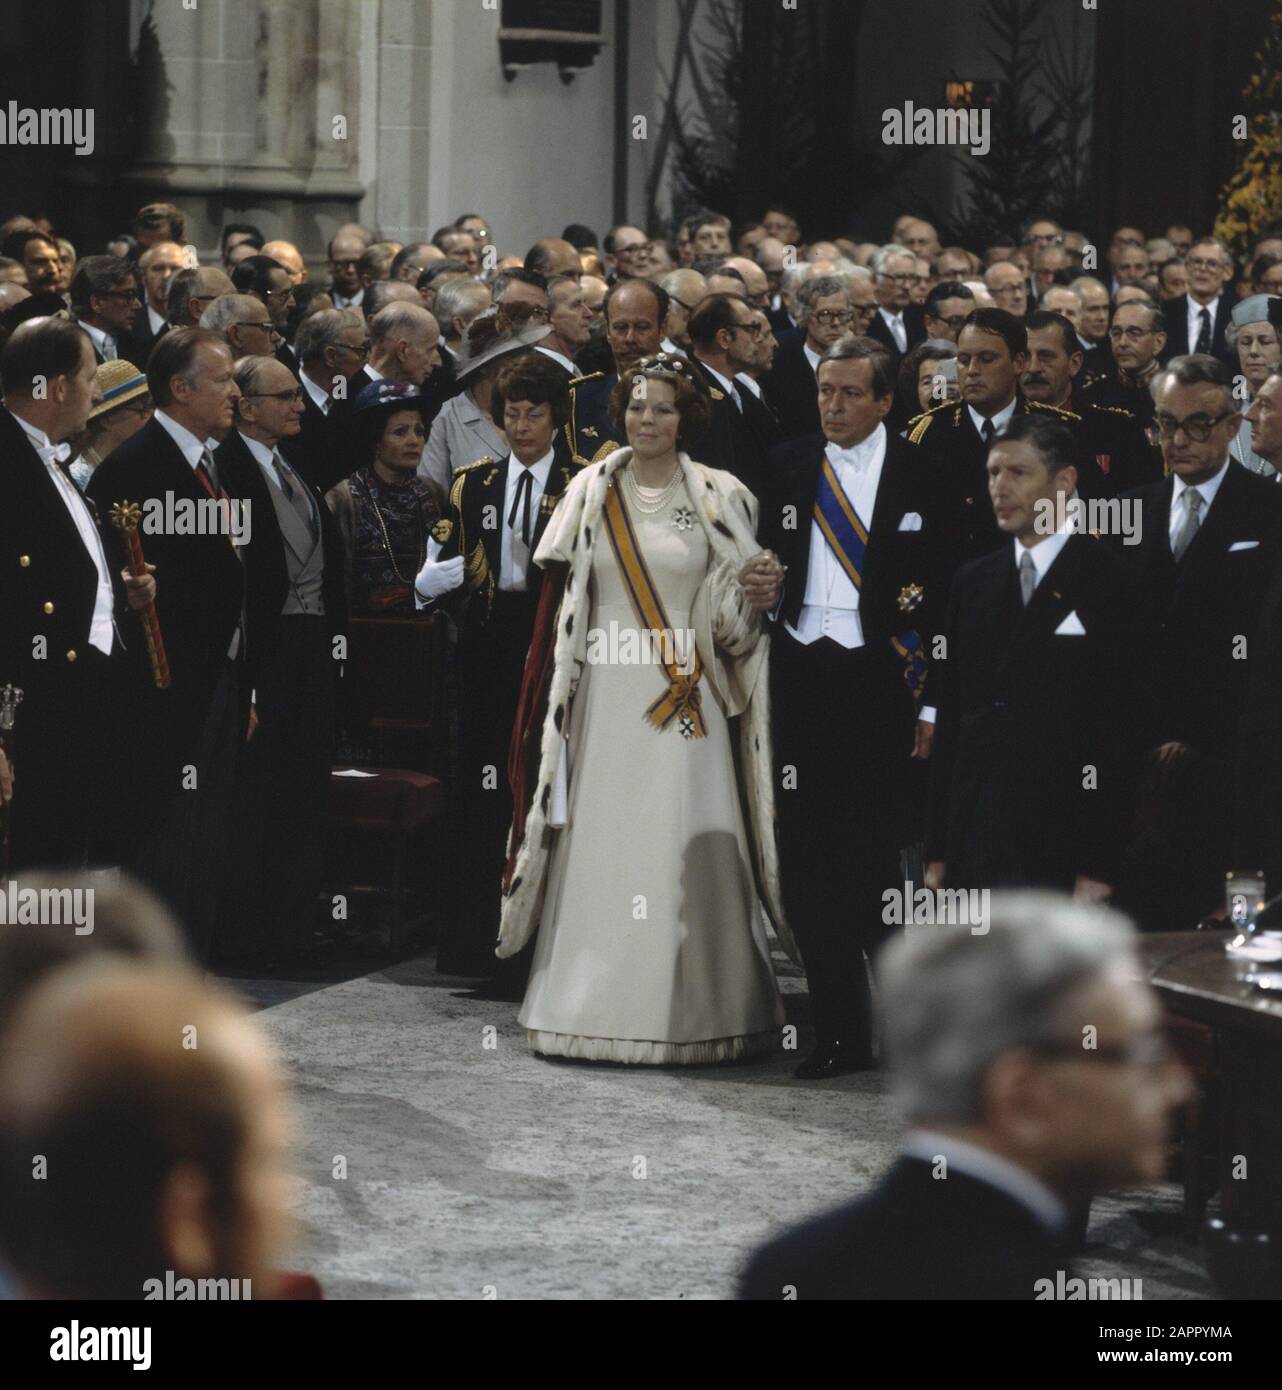 Throne change 30 April: inauguration in New Church; Princess Beatrix and Prince Claus during entering church Annotation: Rechtsvoor minister-president Van Agt Date: 30 August 1980 Keywords: Throne changes, inaugurations, churches Personal name: Beatrix, princess, Claus, prince Stock Photo